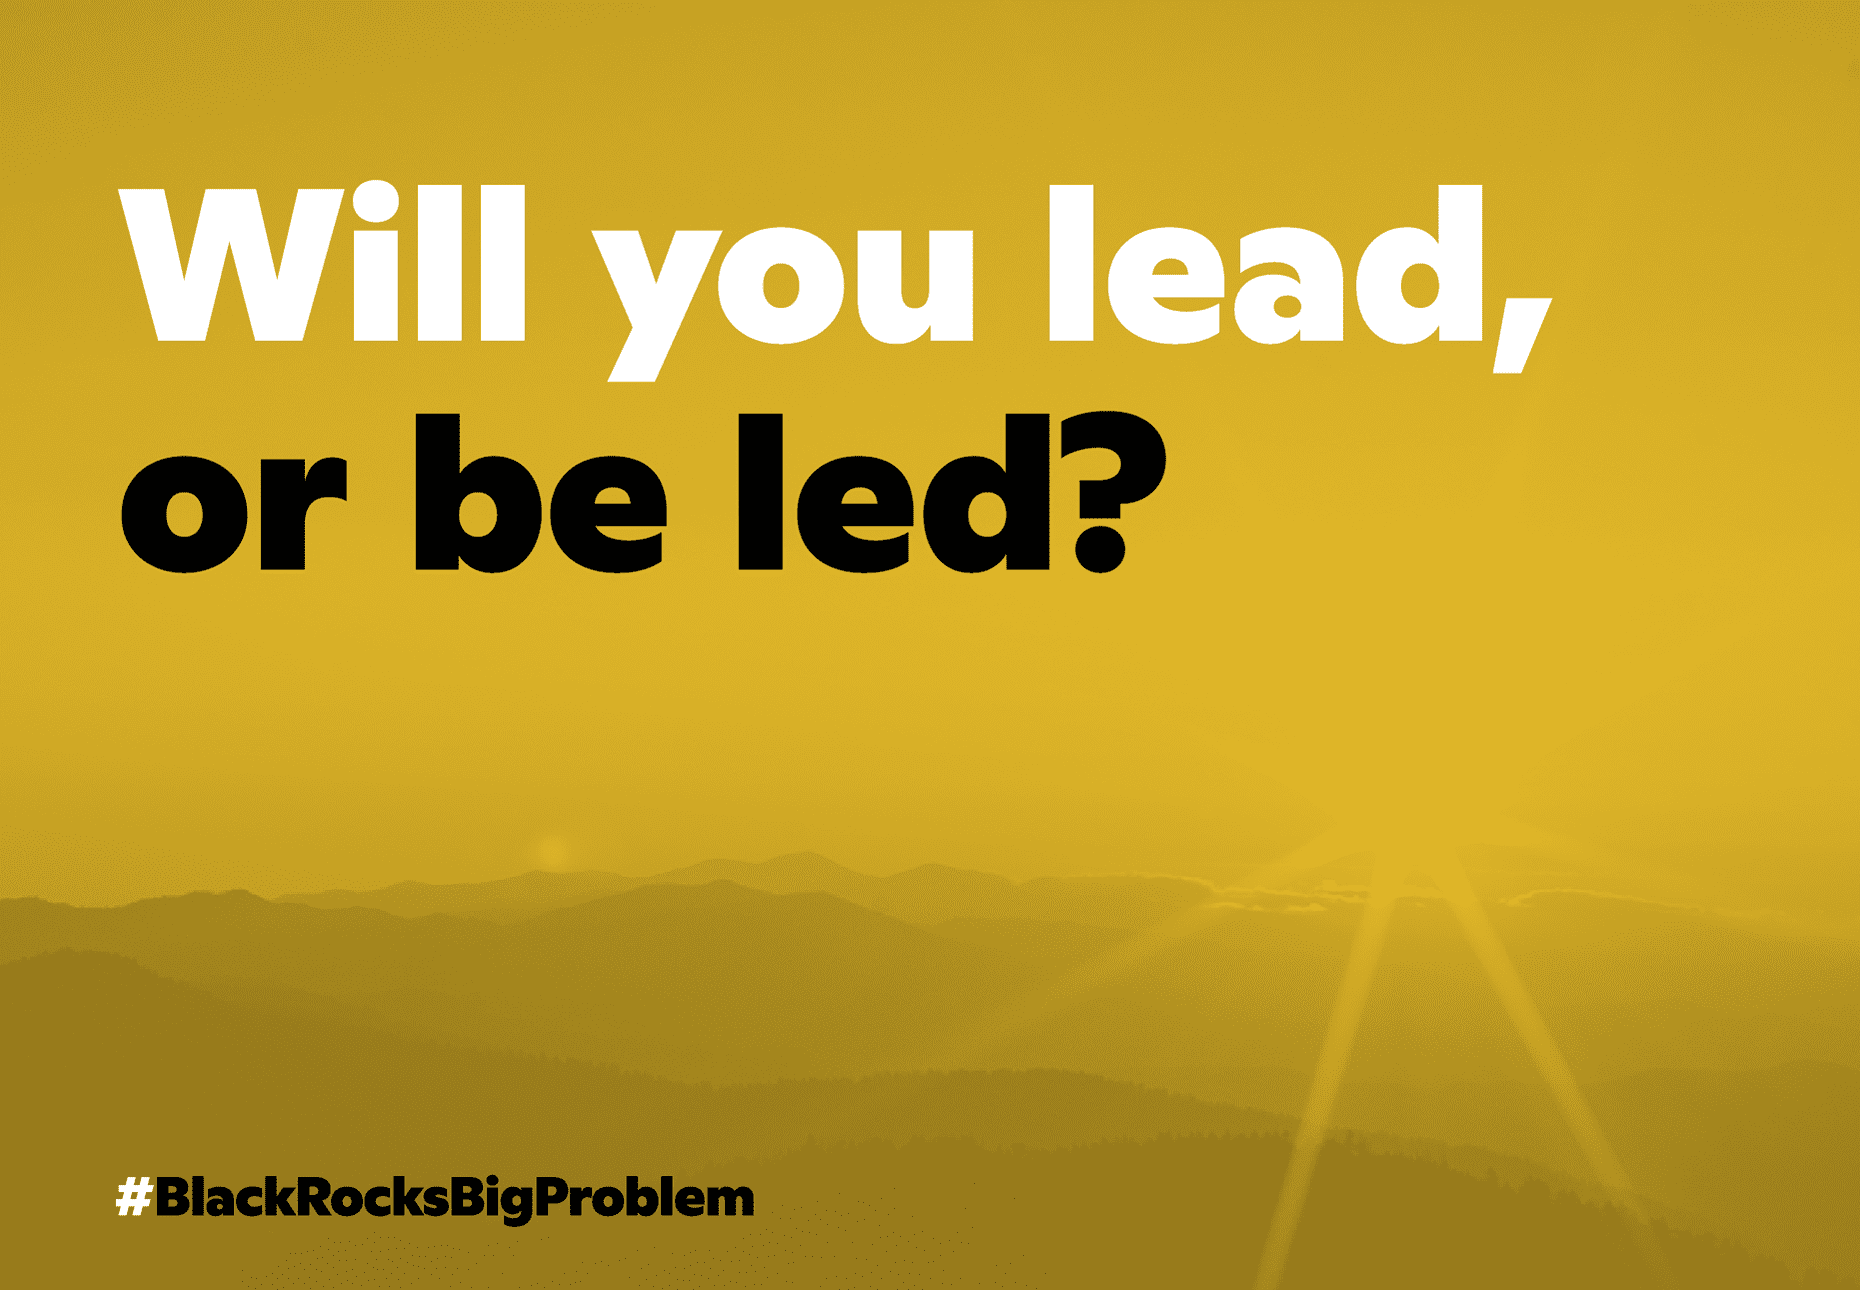 A yellow-tinted photo of a sun shining over the peaks of a mountain range. Overlaid is text reading “Will you lead, or be led?” the first part in white text, the second half in black text. The BlackRock’s Big Problem campaign watermark is in the bottom corner.